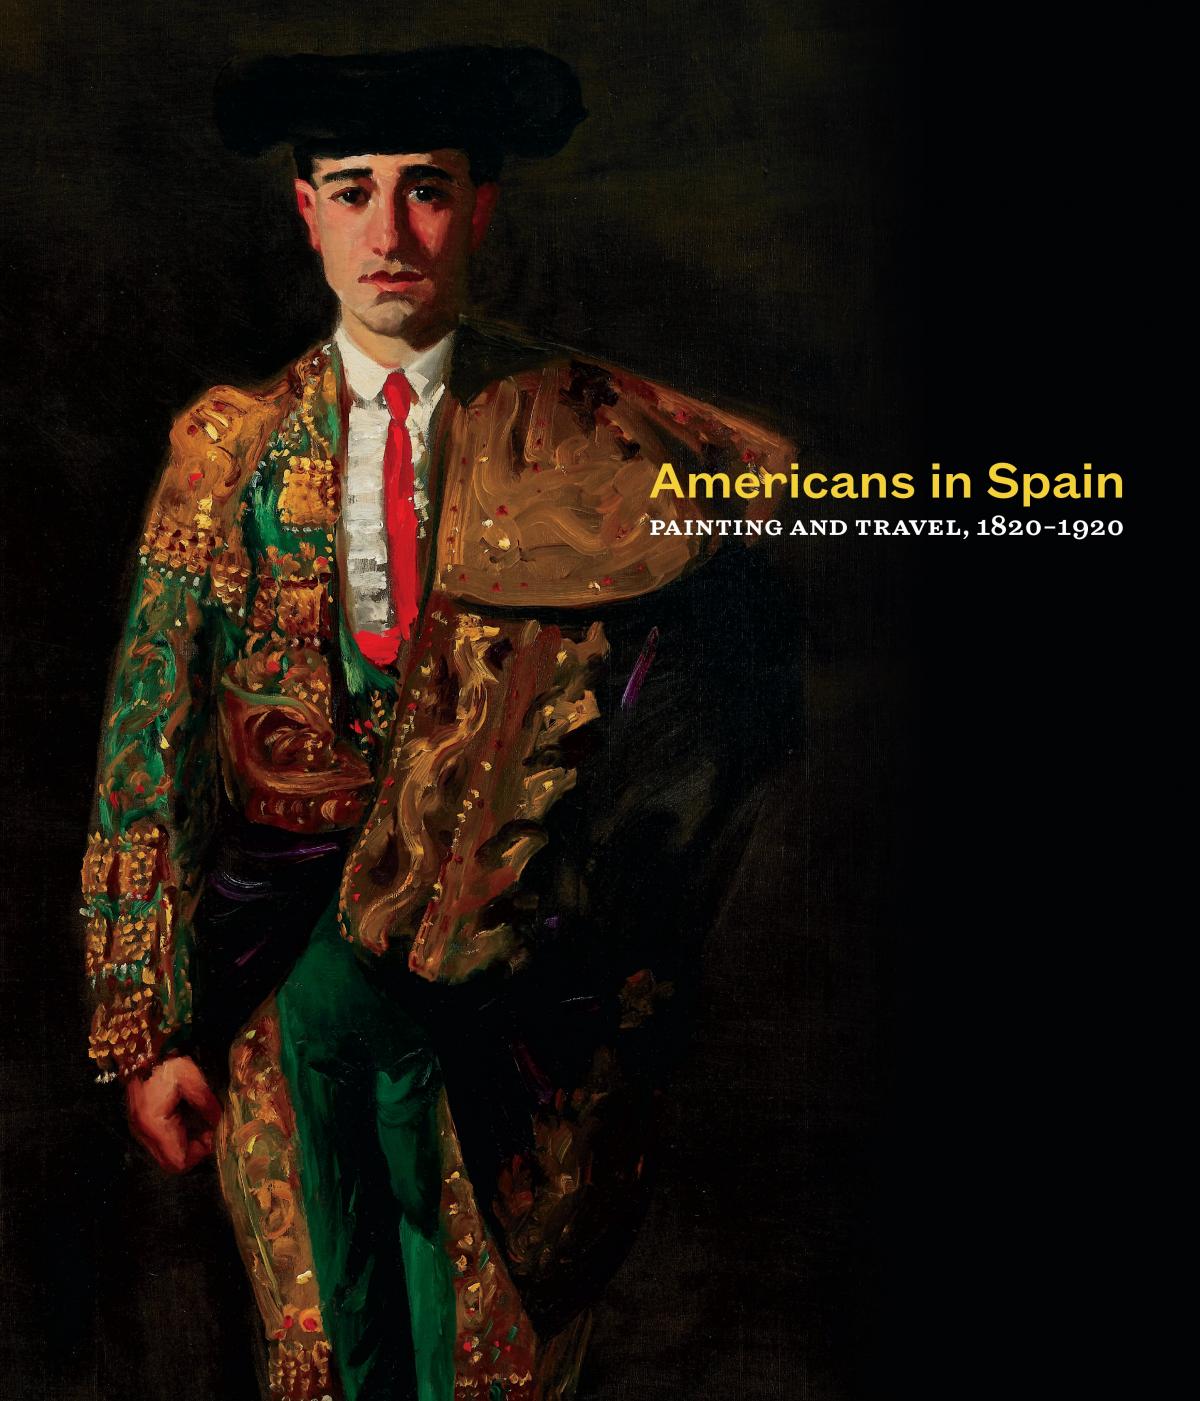 Book cover with painting of matador